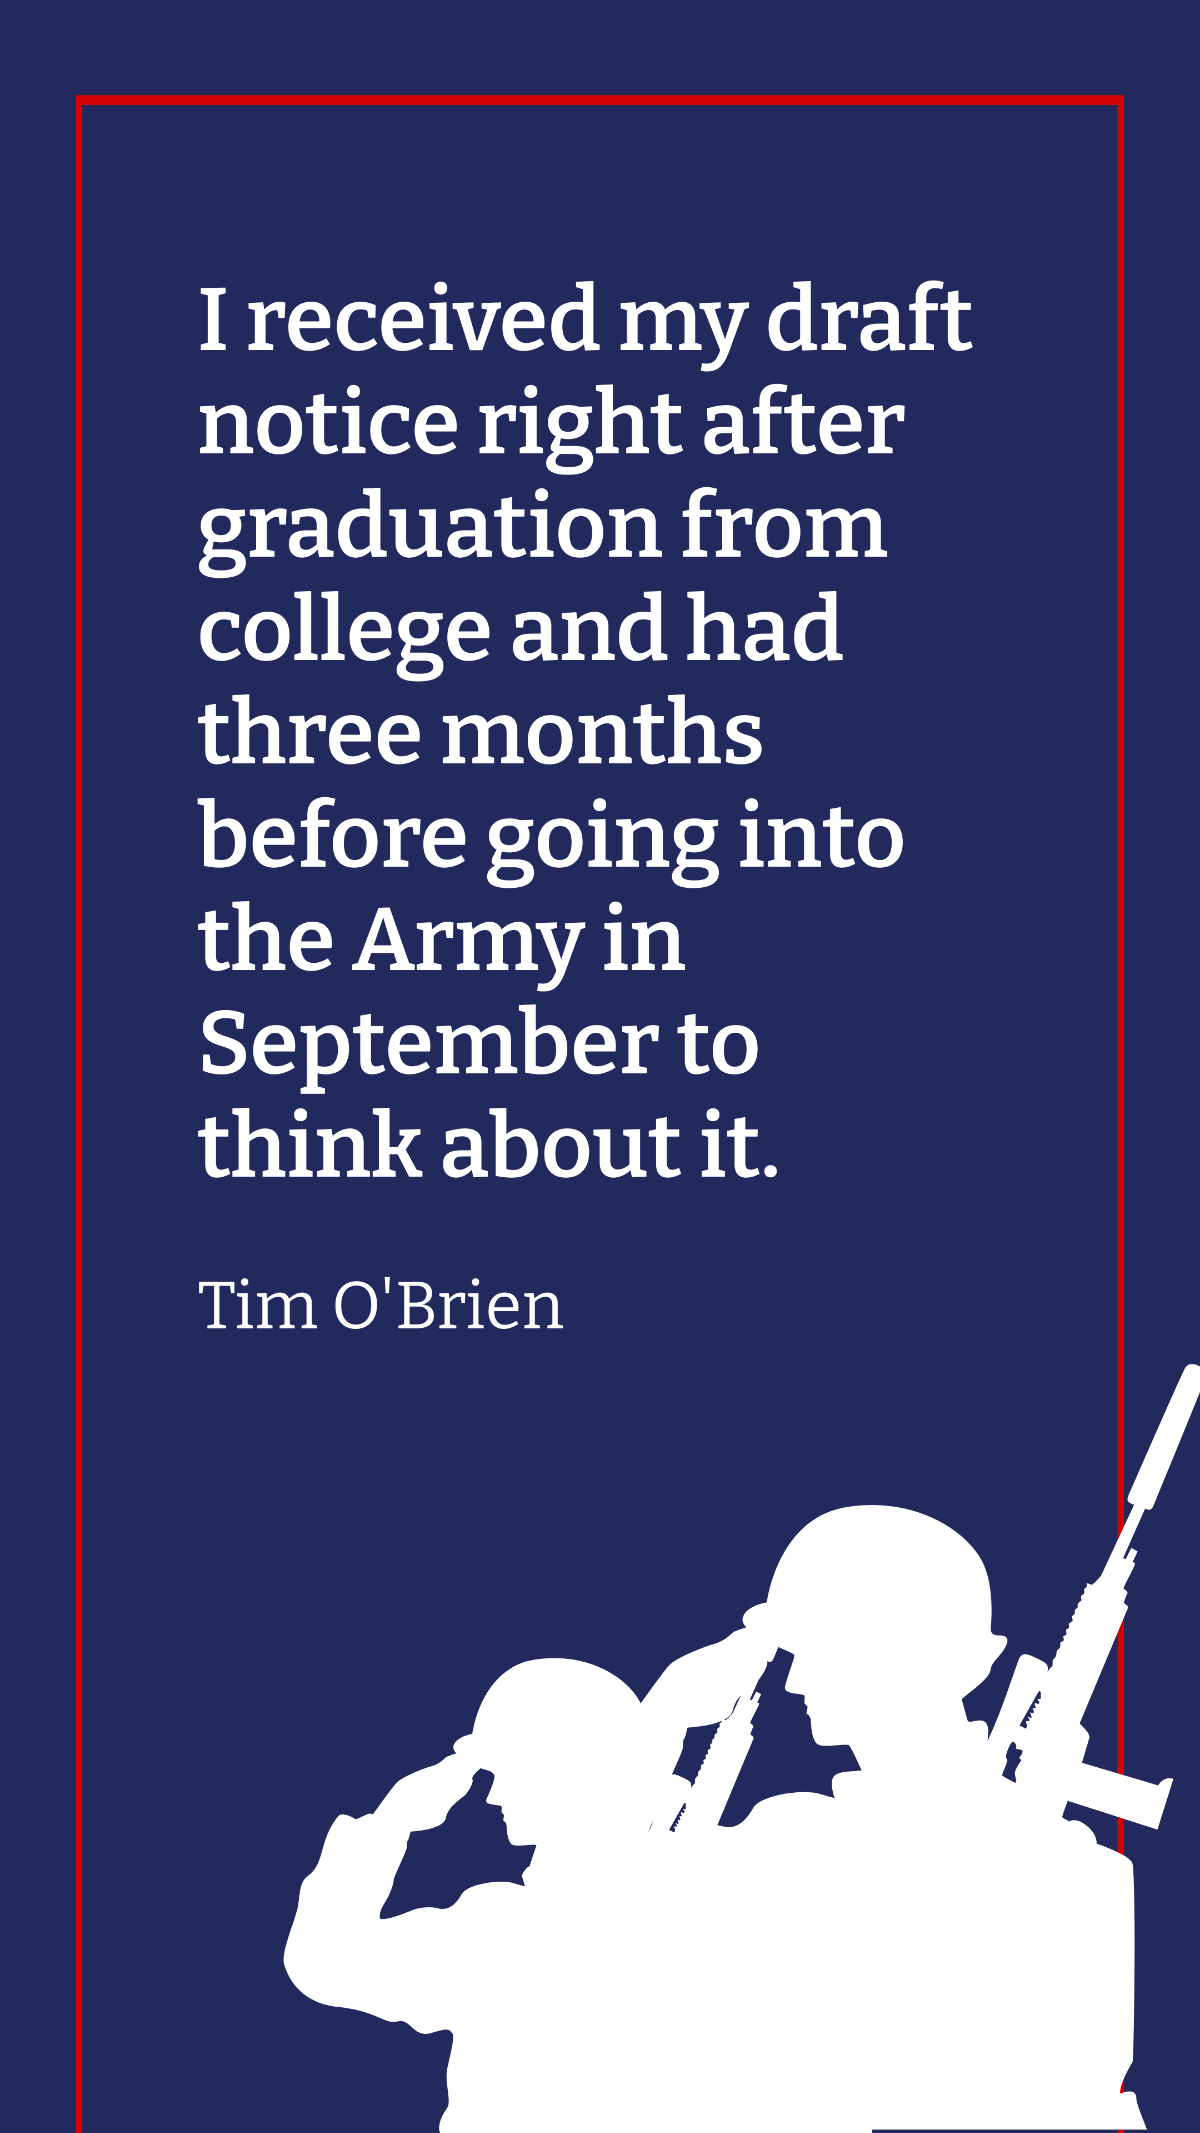 Tim O'Brien - I received my draft notice right after graduation from college and had three months before going into the Army in September to think about it. Template